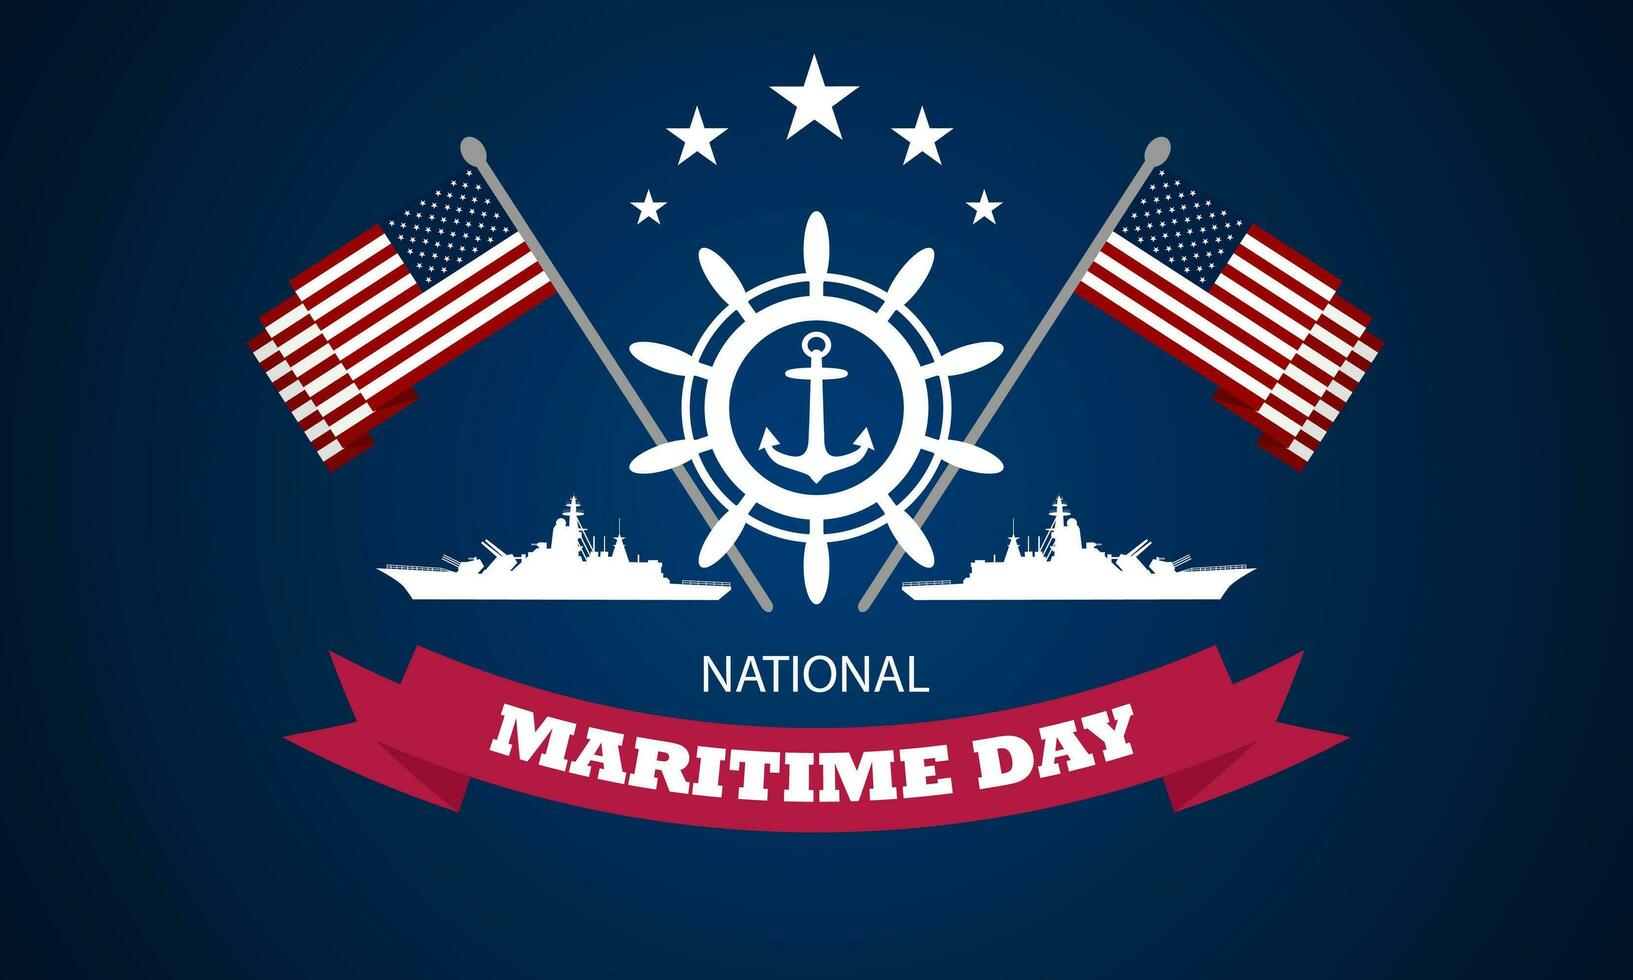 Happy National Maritime Day May 22 Background vector illustration